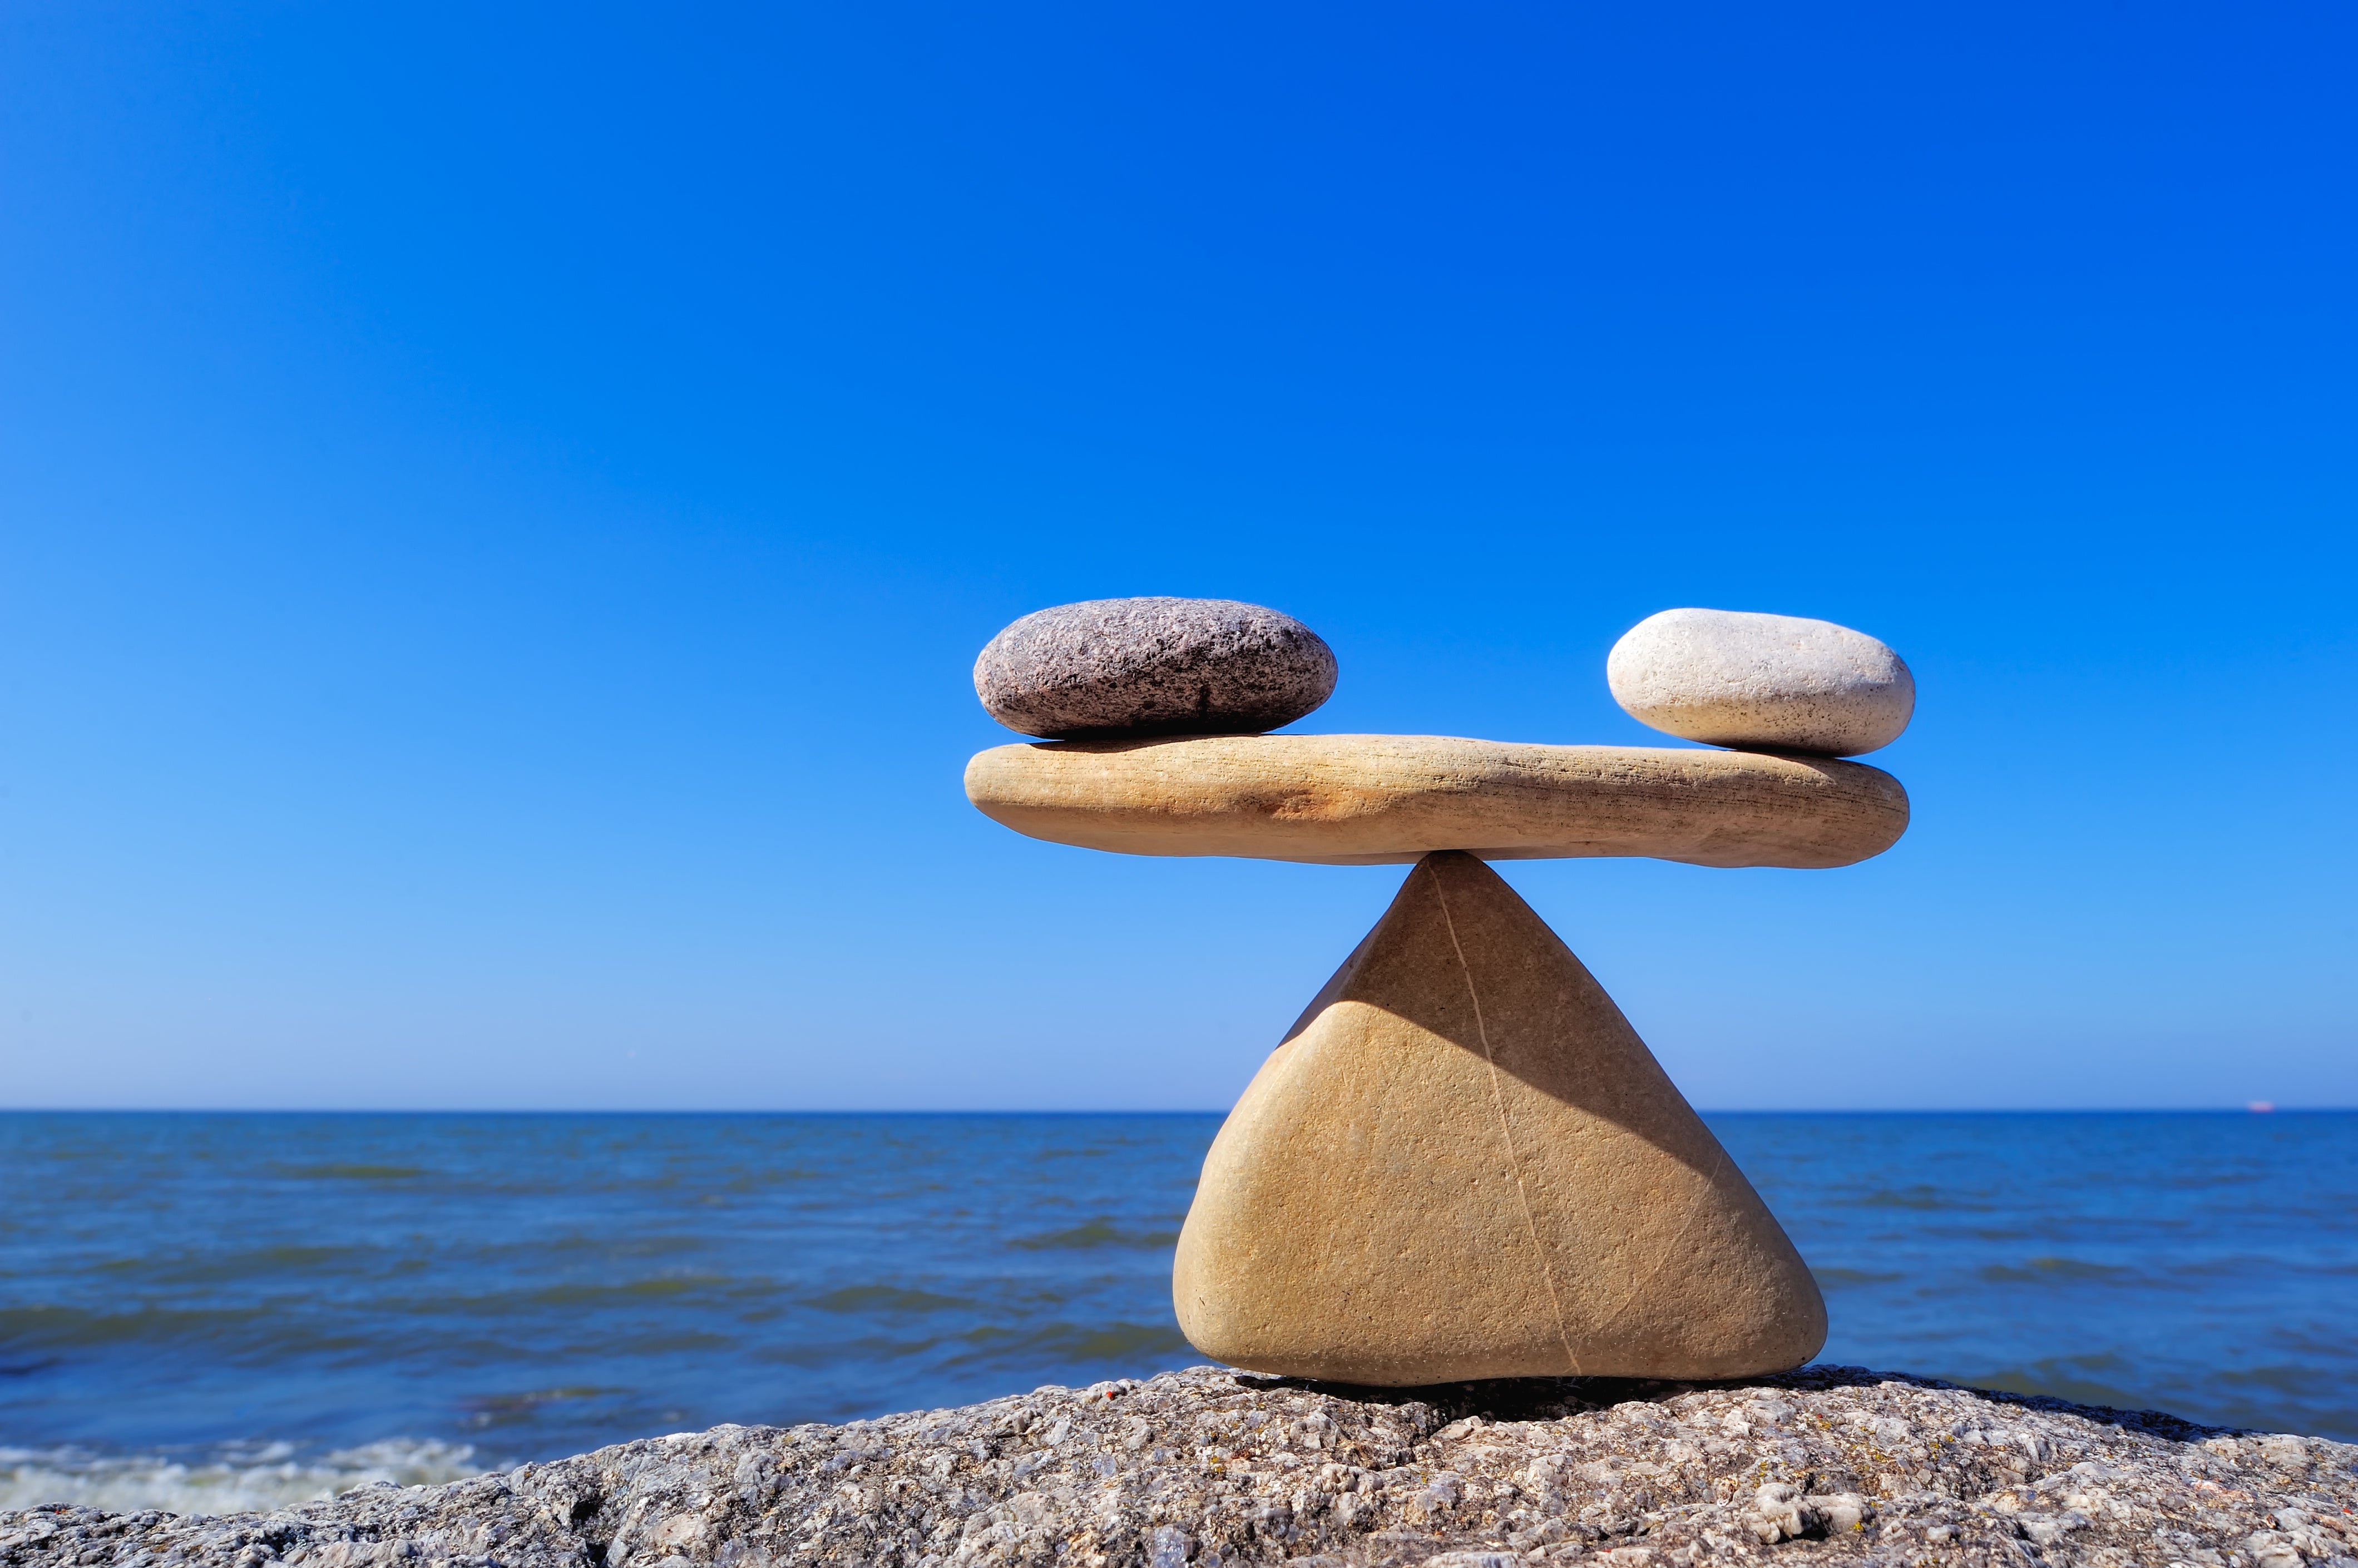 A white stone and black stone sitting on a flat stone which, in turn, is balanced atop a stone shaped like a pyramid.